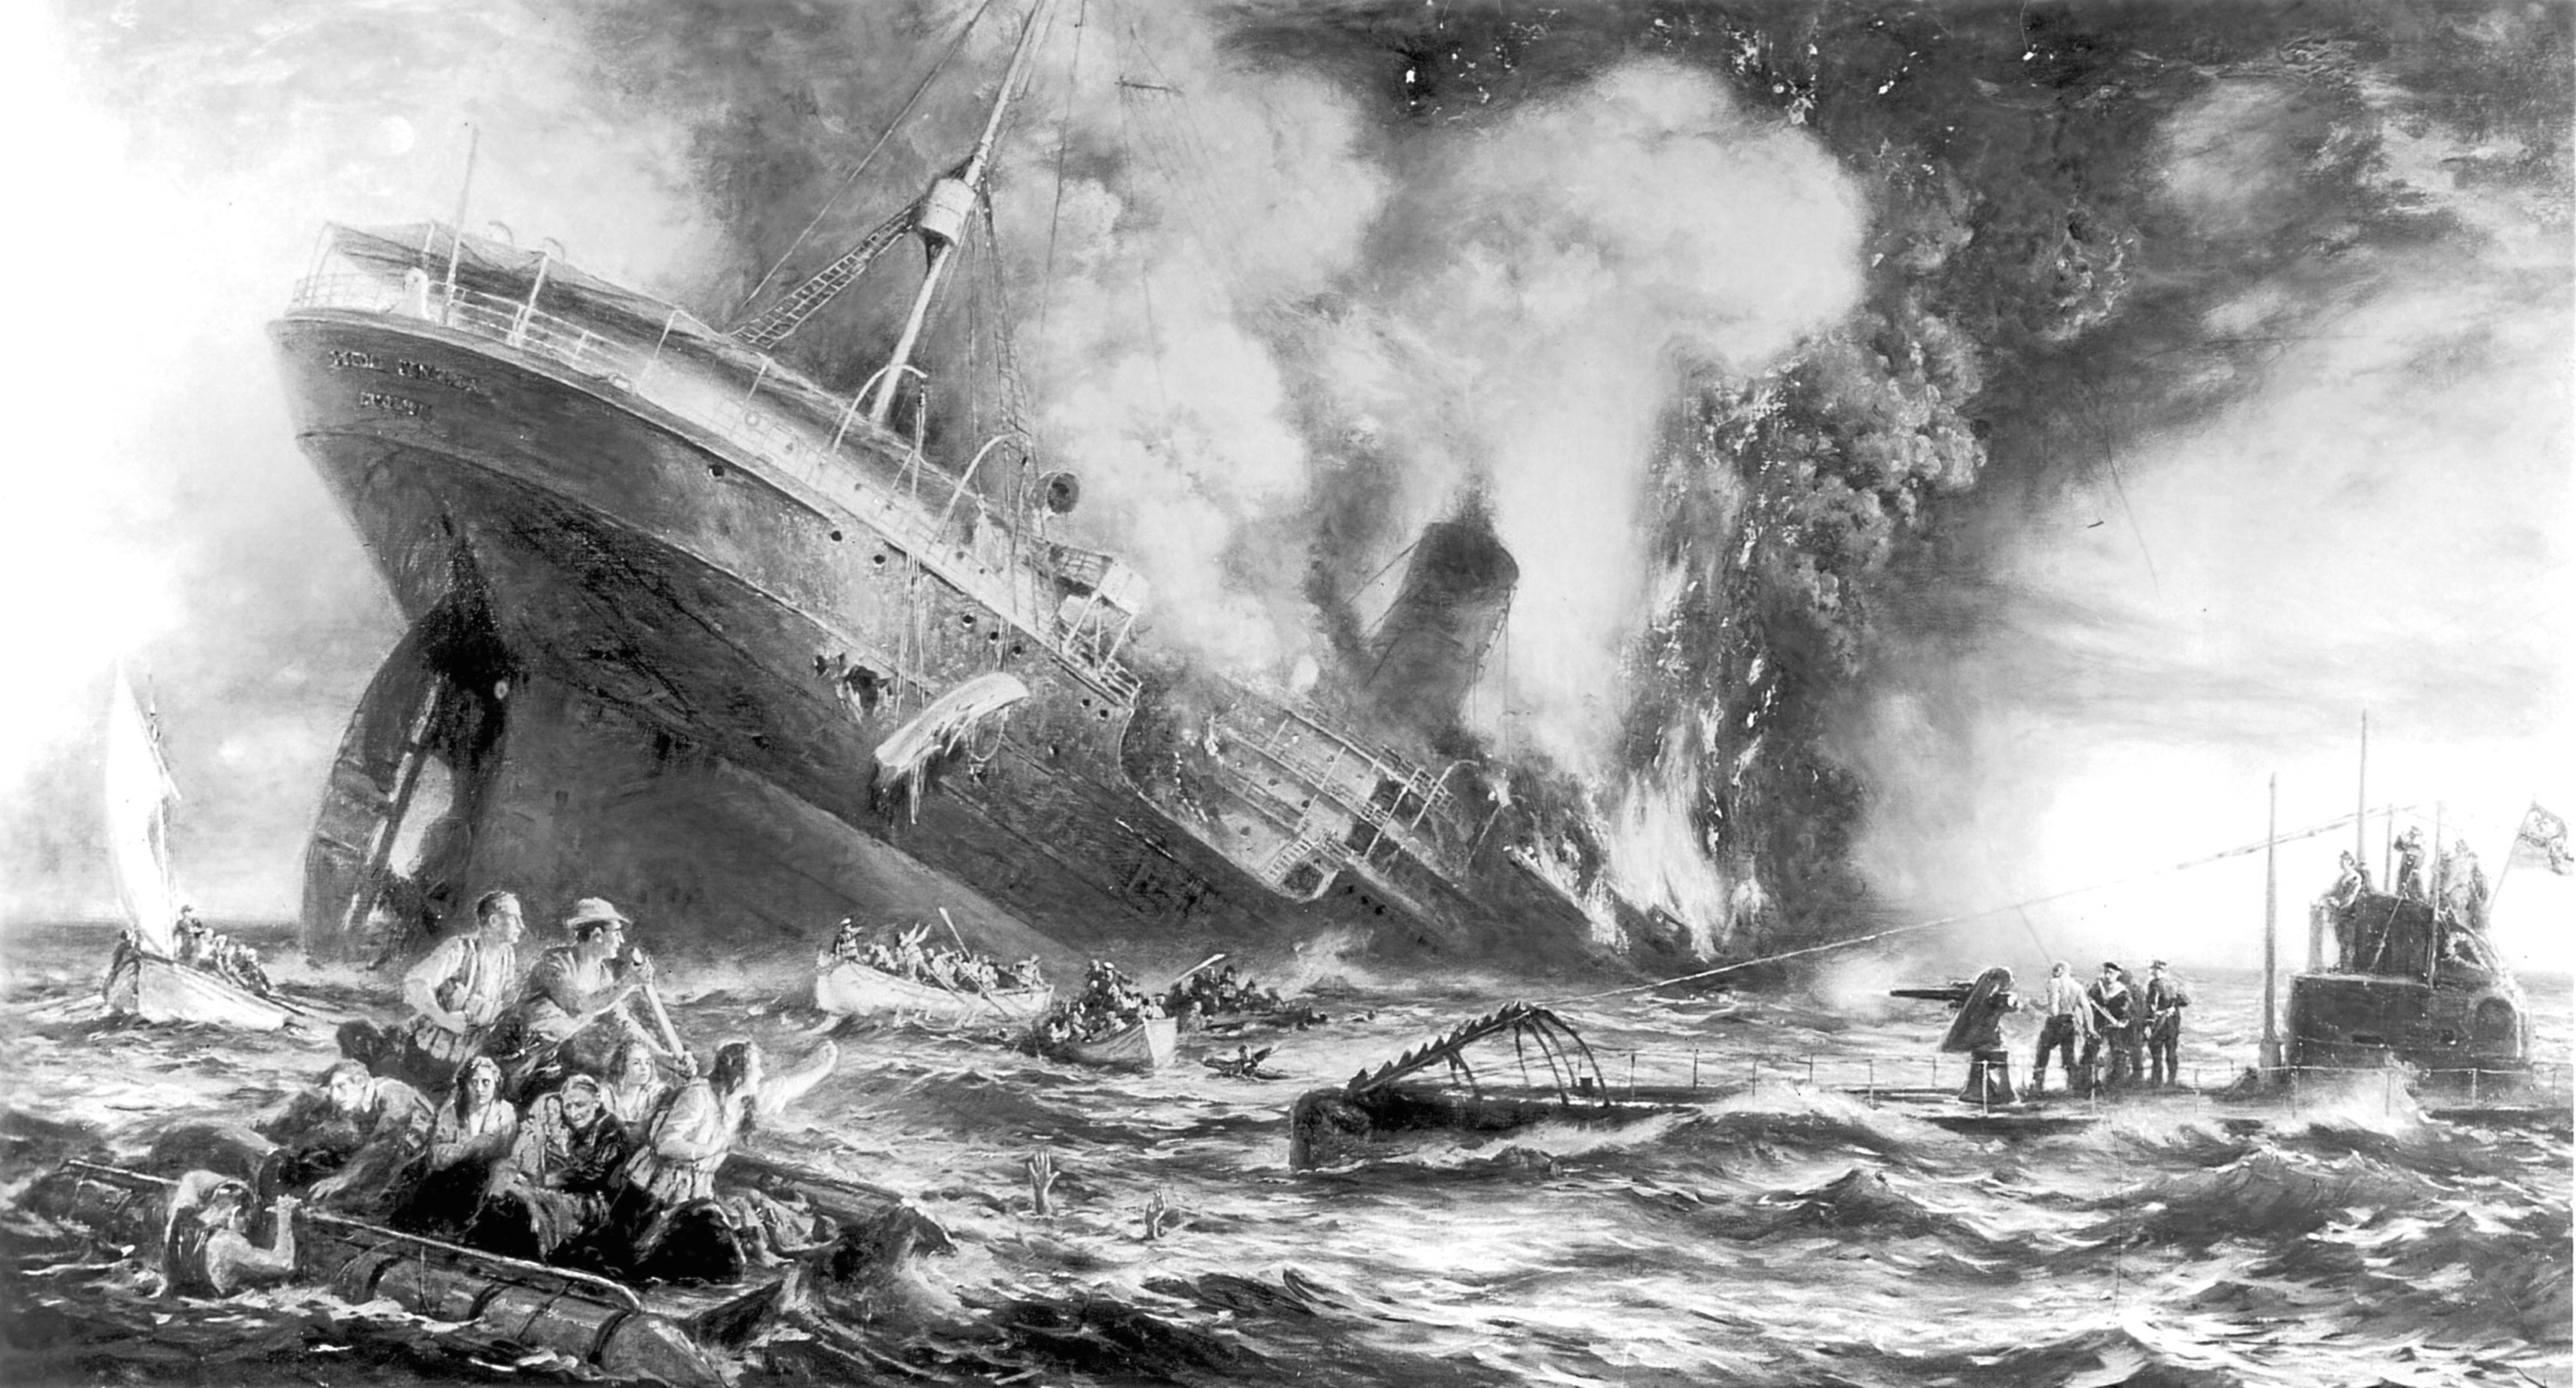 7th May 1915: The sinking of the Cunard ocean liner 'Lusitania' by a German submarine off the Old Head of Kinsale, Ireland. 128 US citizens lost their lives and the tragedy helped bring the USA into World War I. (Photo by Three Lions/Getty Images)